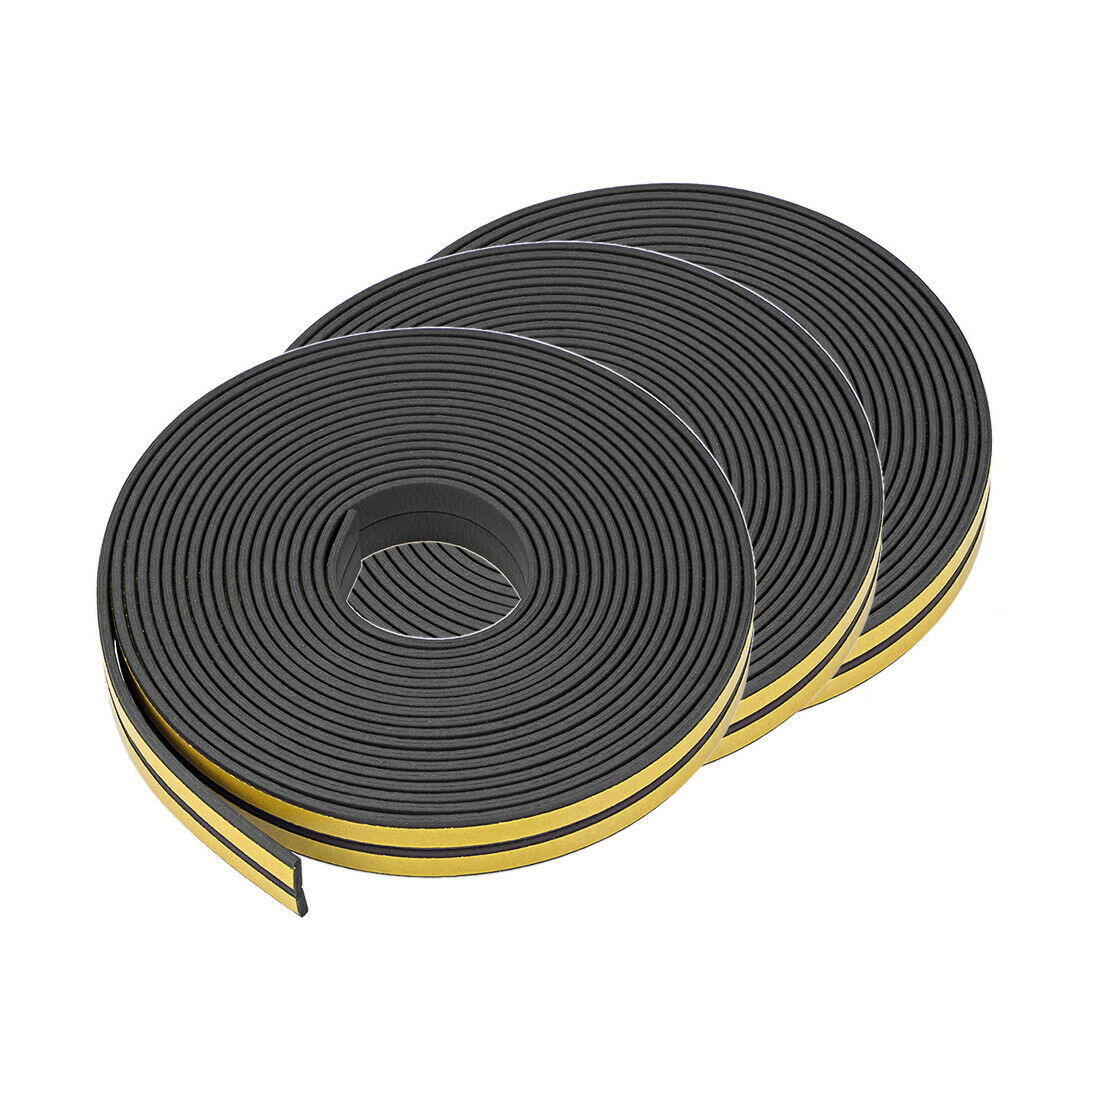 Foam Tape Adhesive Weather Strip 9mm Wide 2mm Thick, 5 Meters Long Black, 3pcs